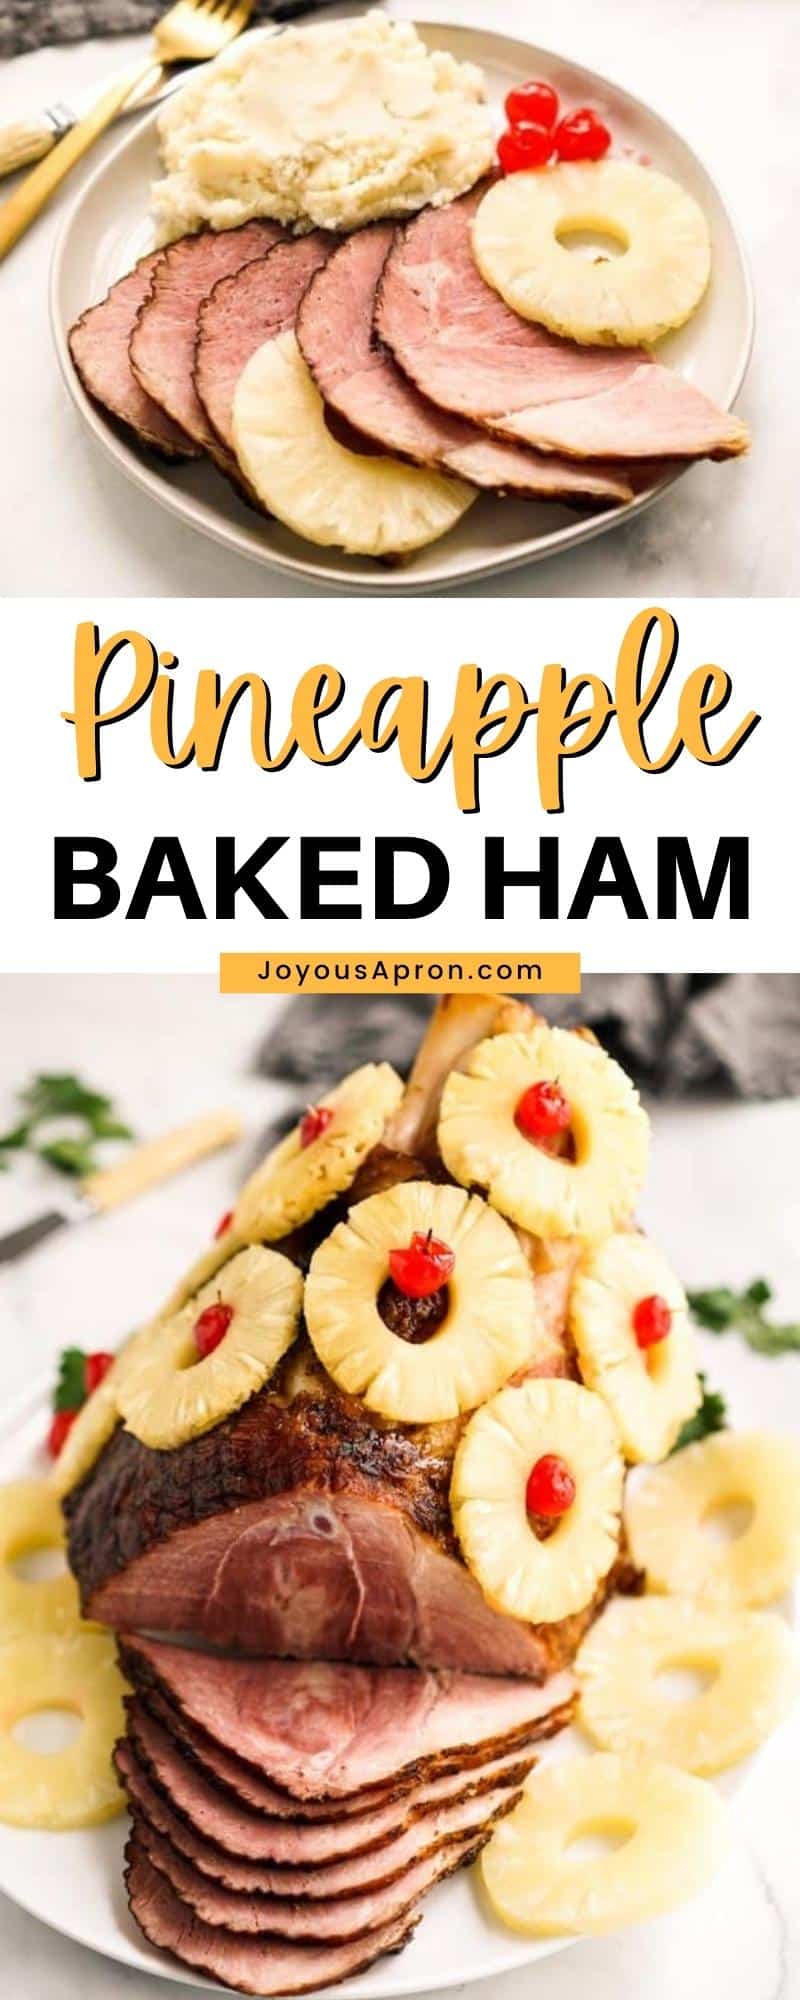 Pineapple Baked Ham - Oven baked bone in ham topped with pineapple rings and cherries. Moist, not dry and so juicy. Perfect centerpiece and main dish for Easter and Christmas holidays. via @joyousapron